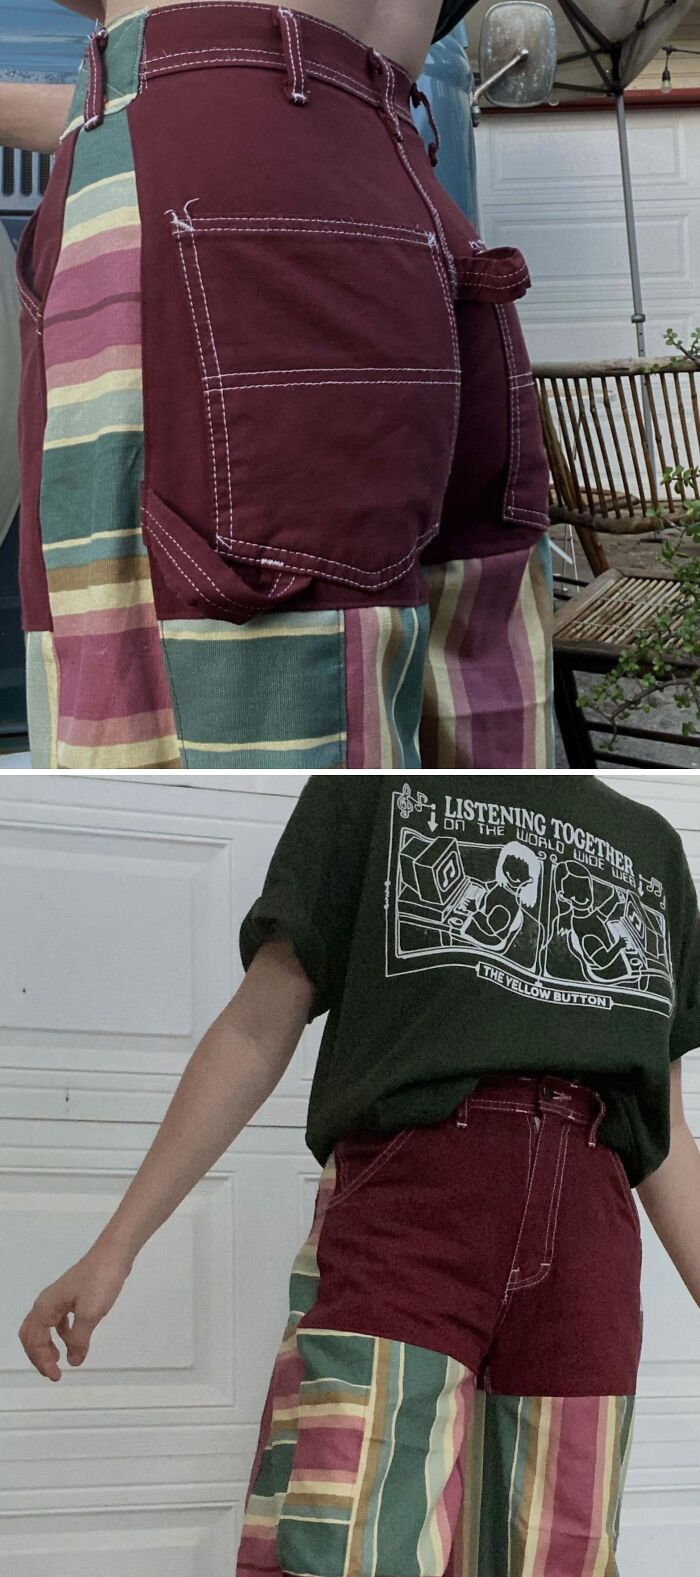 Thrifted These Pants That Didn’t Quite Fit, So I Visibly Altered Their Length / Width!